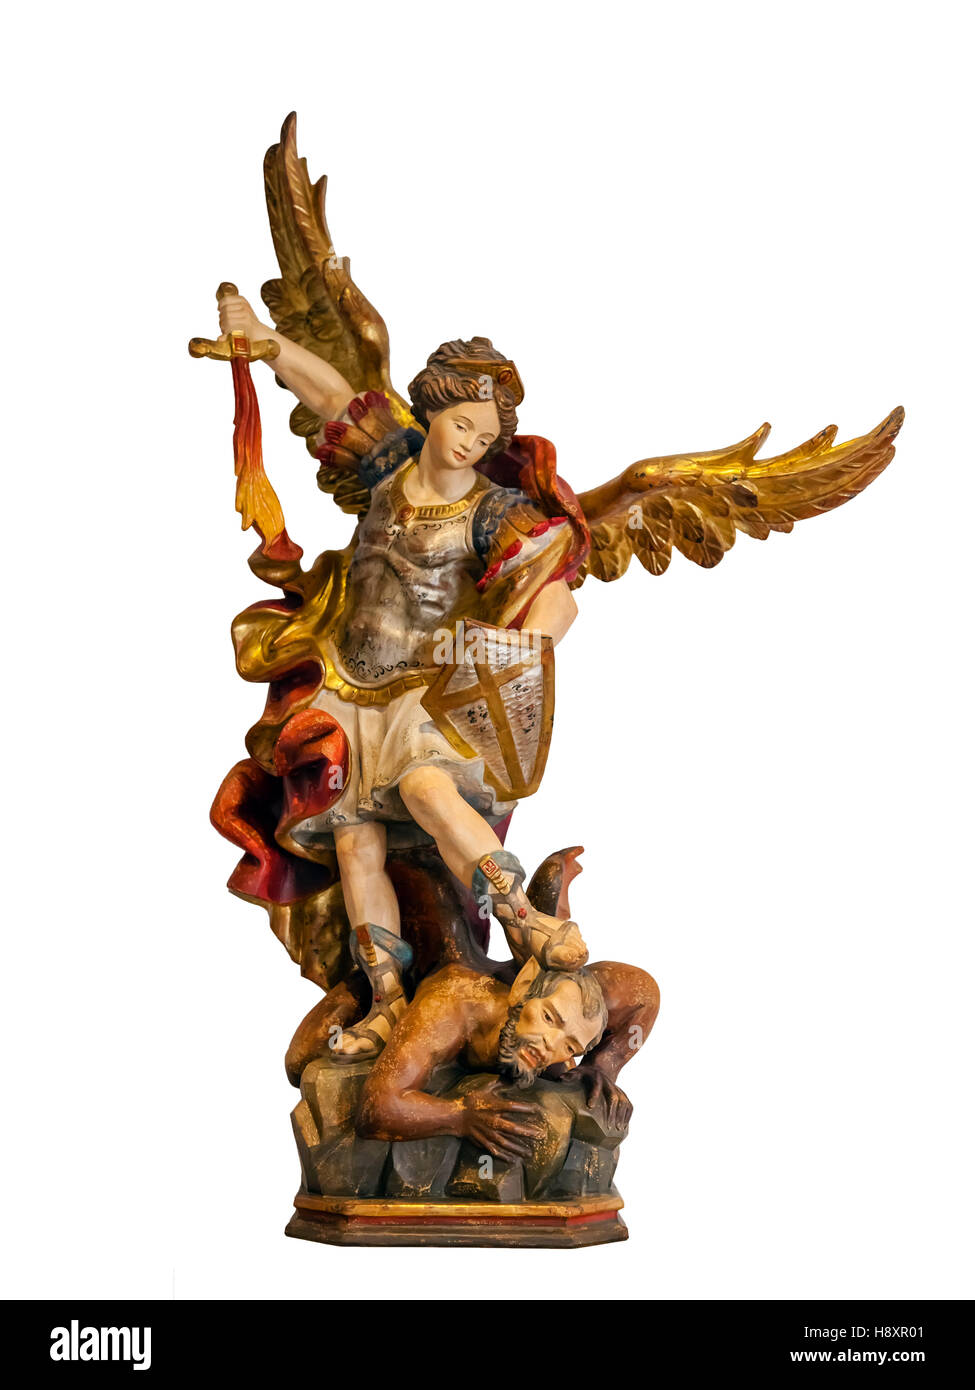 18th century Saint Michael Archangel statue created in the Baroque art style isolated on a white background Stock Photo